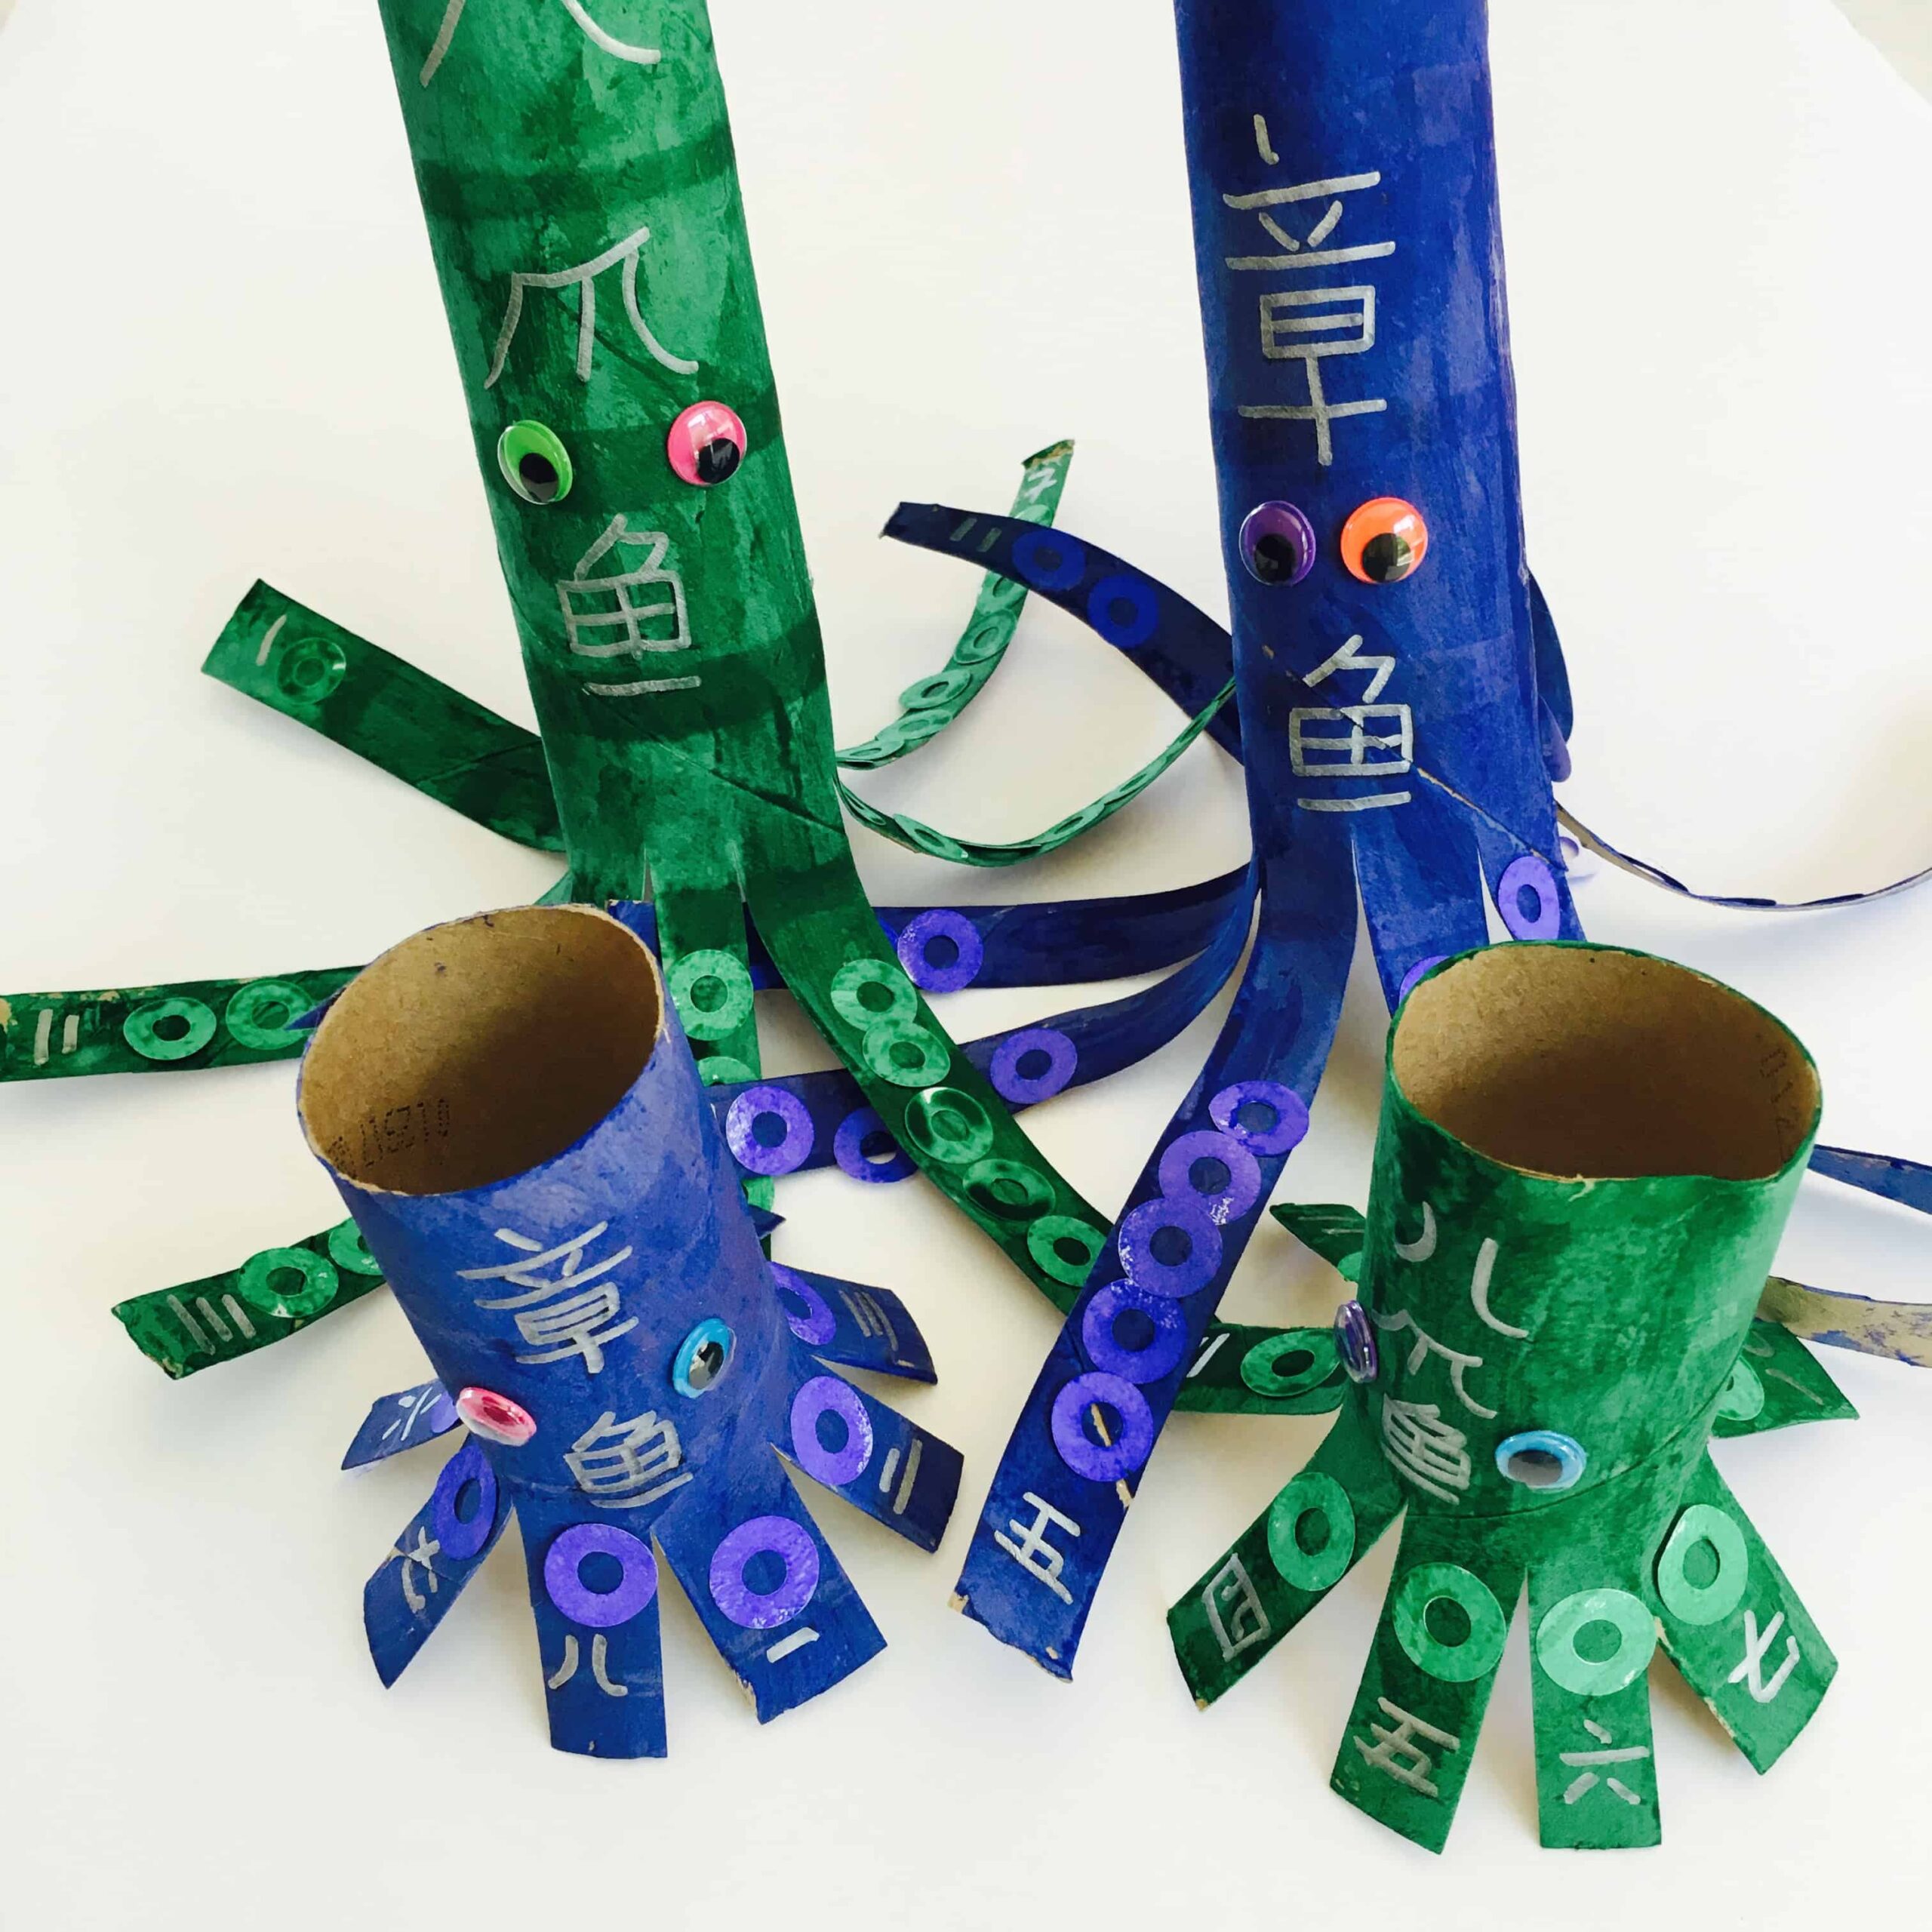 Cardboard Roll Octopus: A Chinese Counting Activity